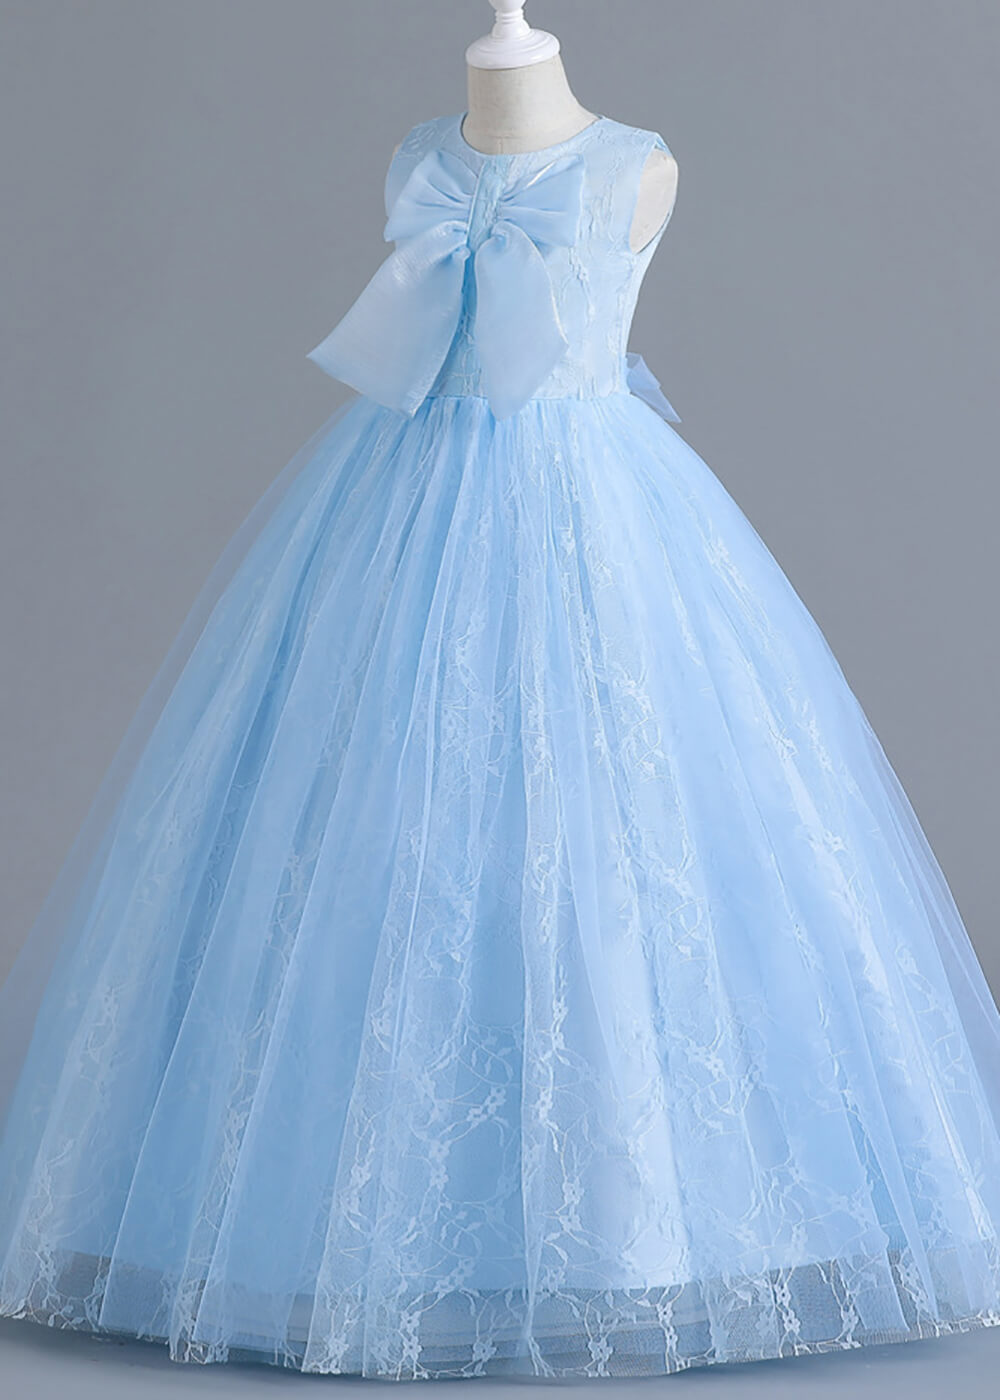 A-line Long Tulle Round Neck Sleeveless Flower Girl Dress With Bow